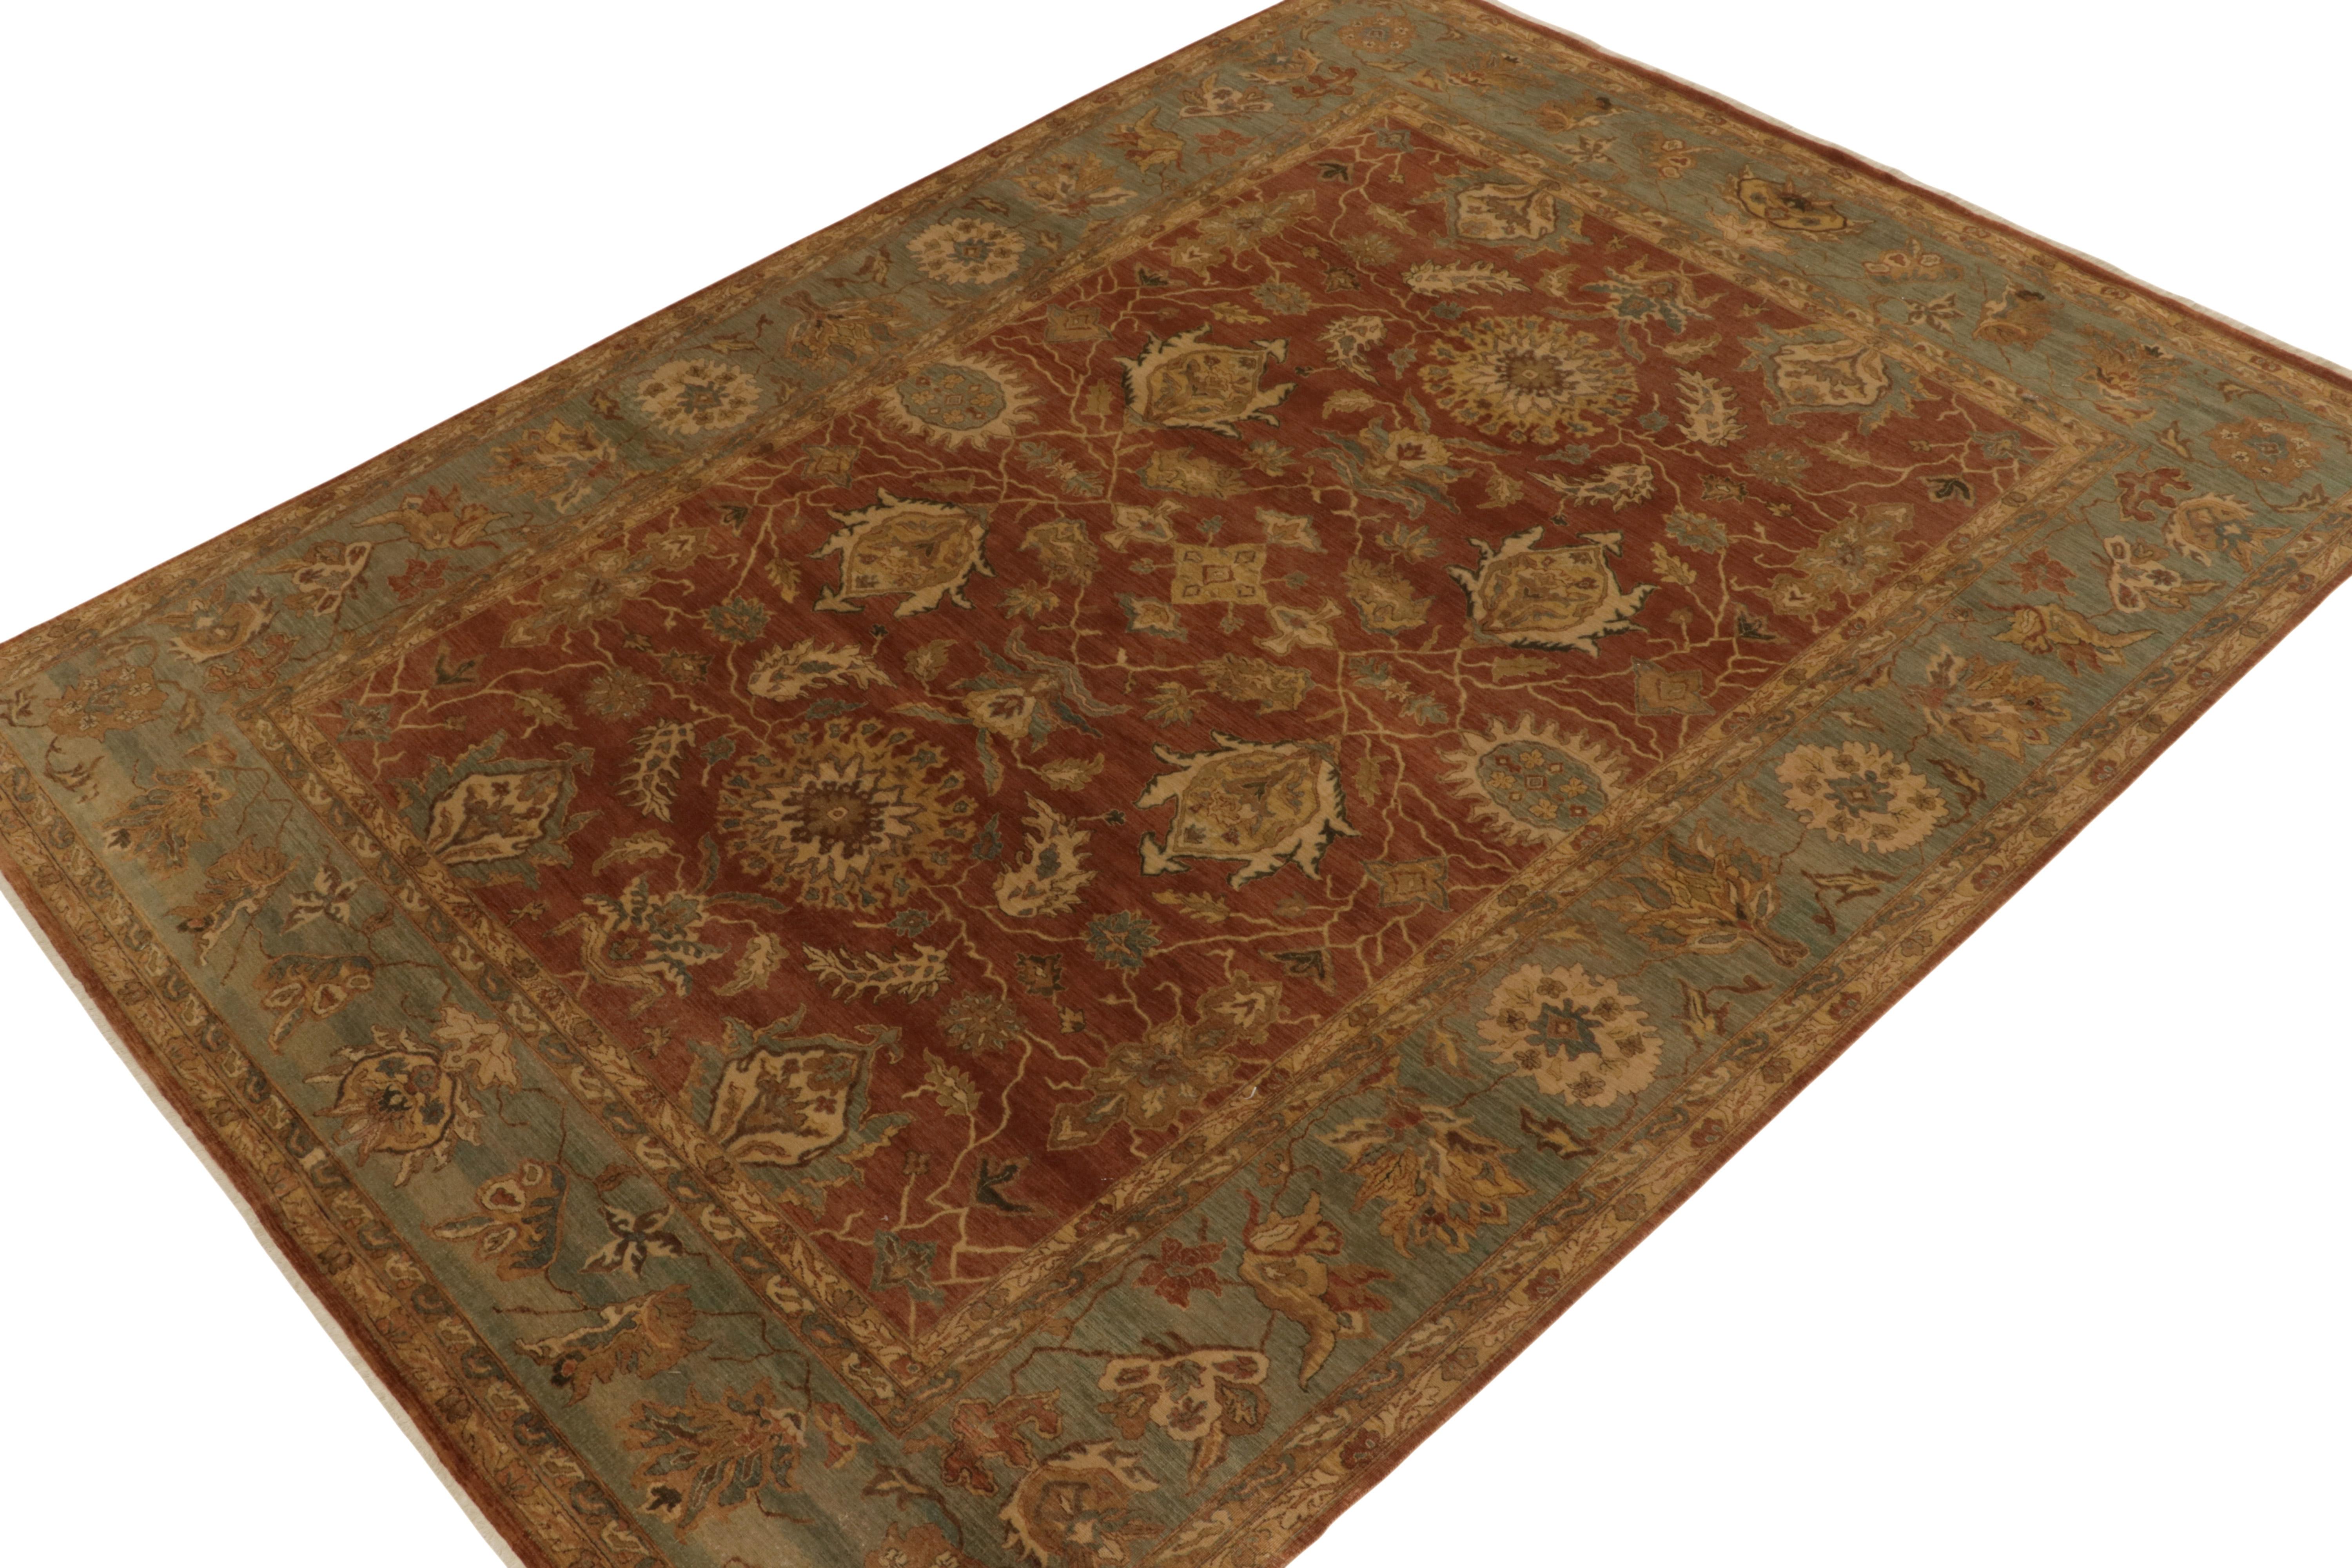 Handknotted in wool, this 9x12 contemporary rug from our Modern Classics collection is particularly inspired by antique Tabriz rugs. 

On the Design: The gracious scale depicts a regal all over floral pattern in gentle beige and blue resting on rich